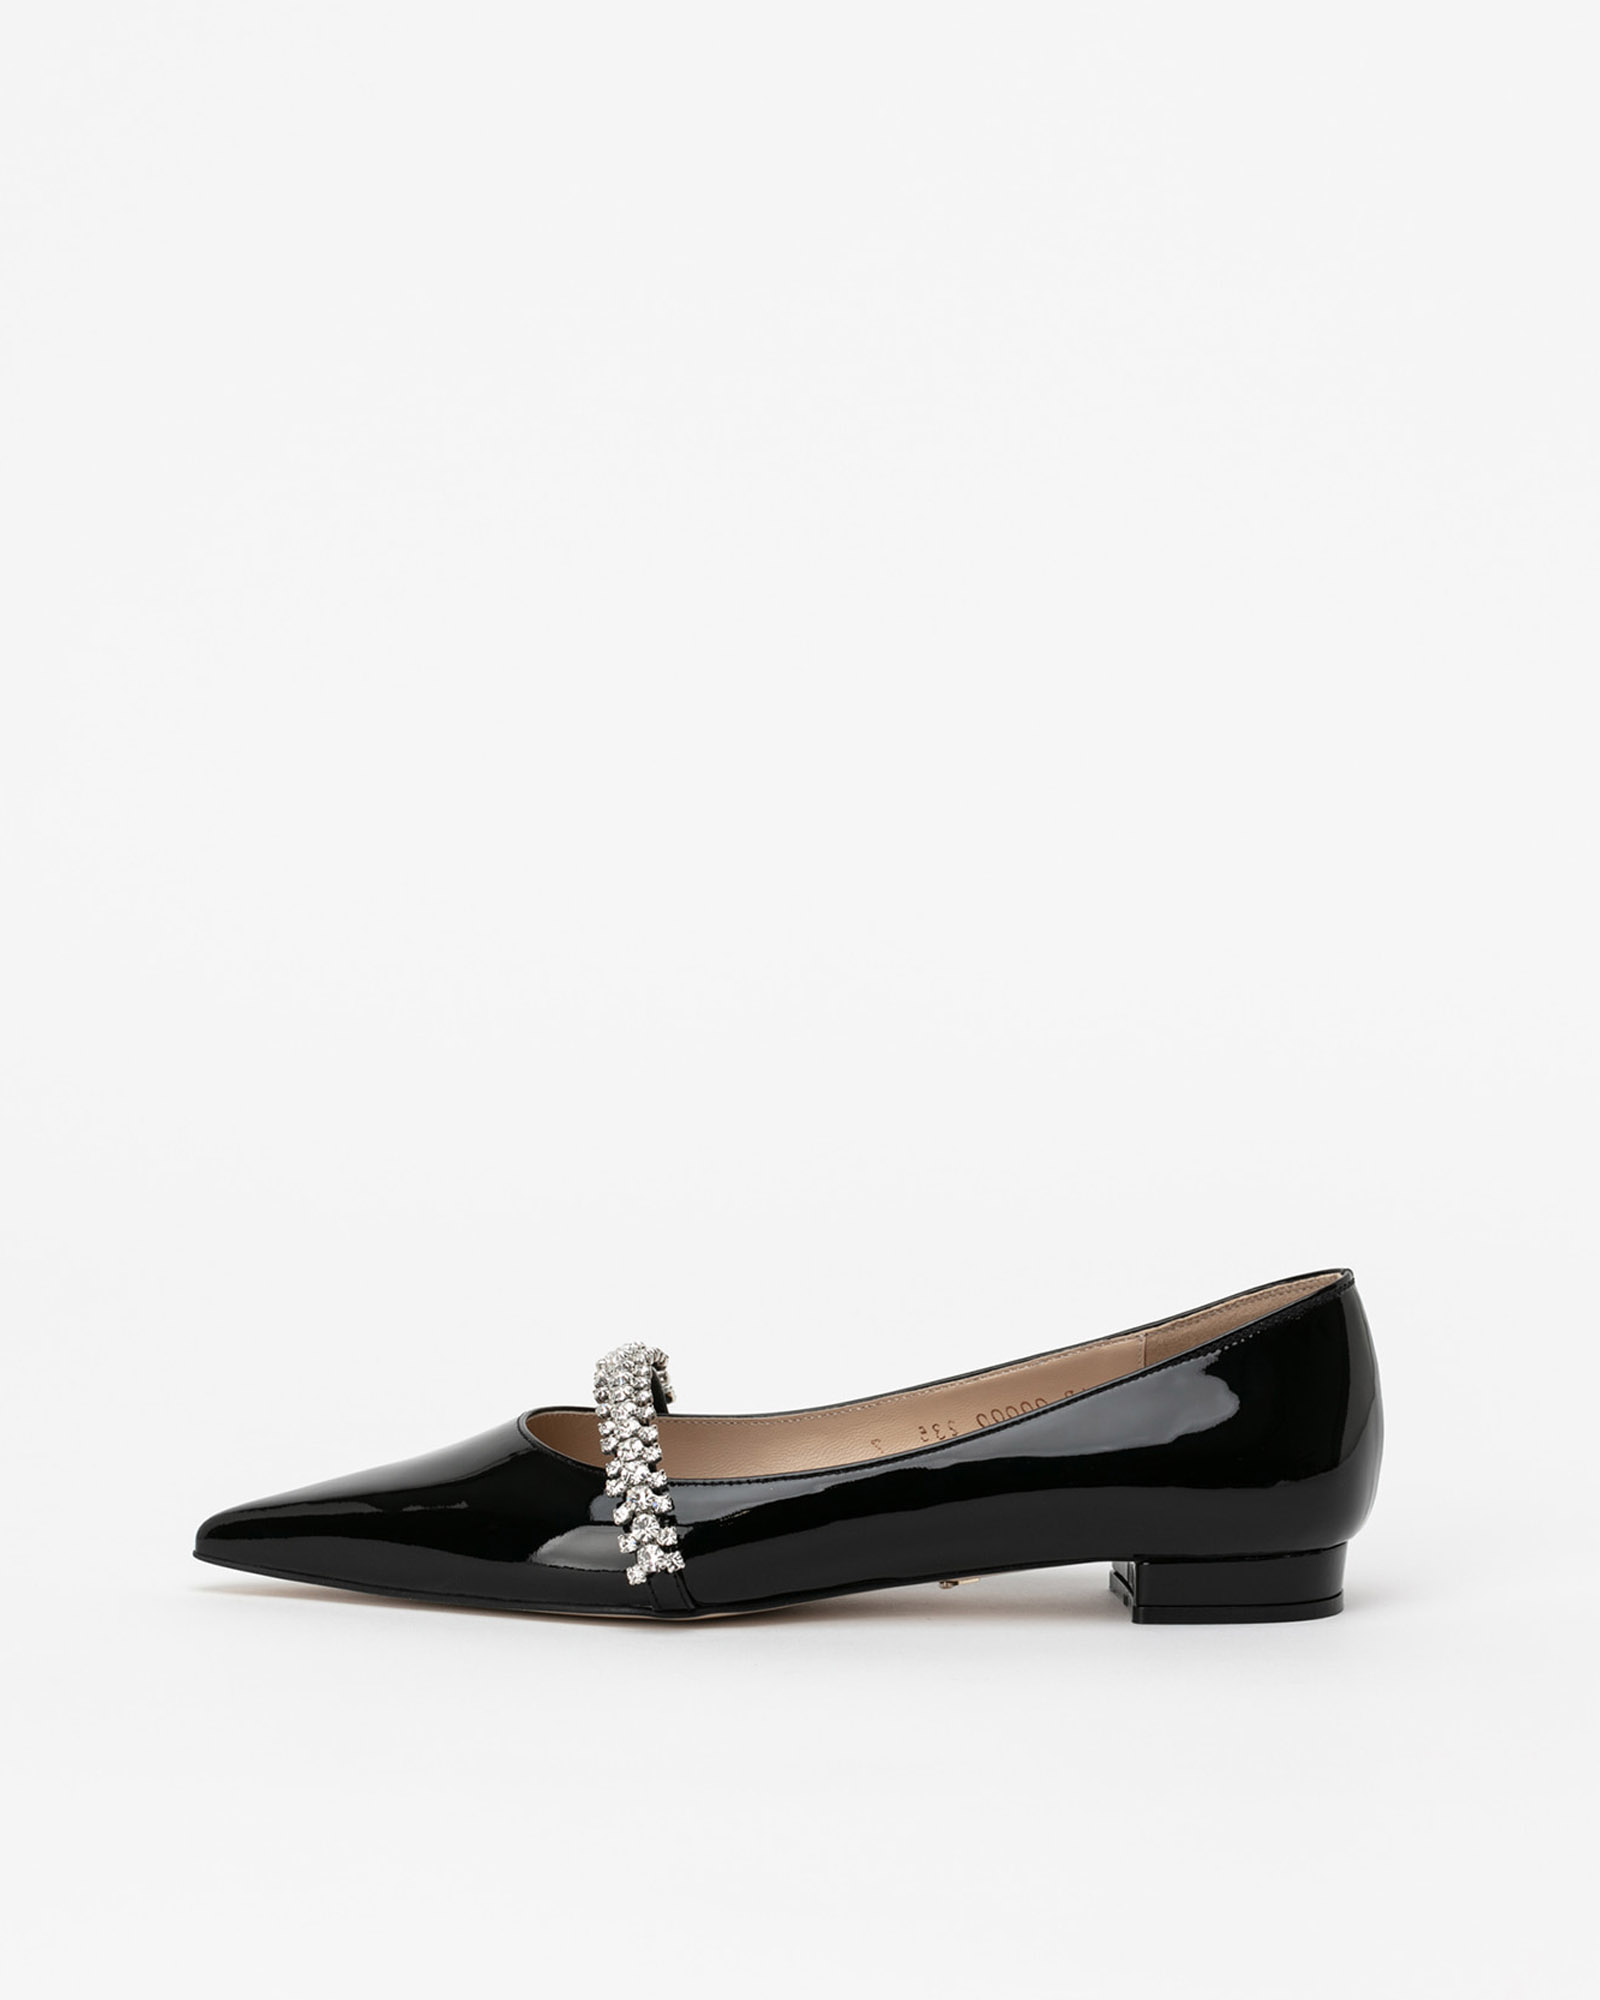 Patio Stiletto Flat Shoes in Black Patent